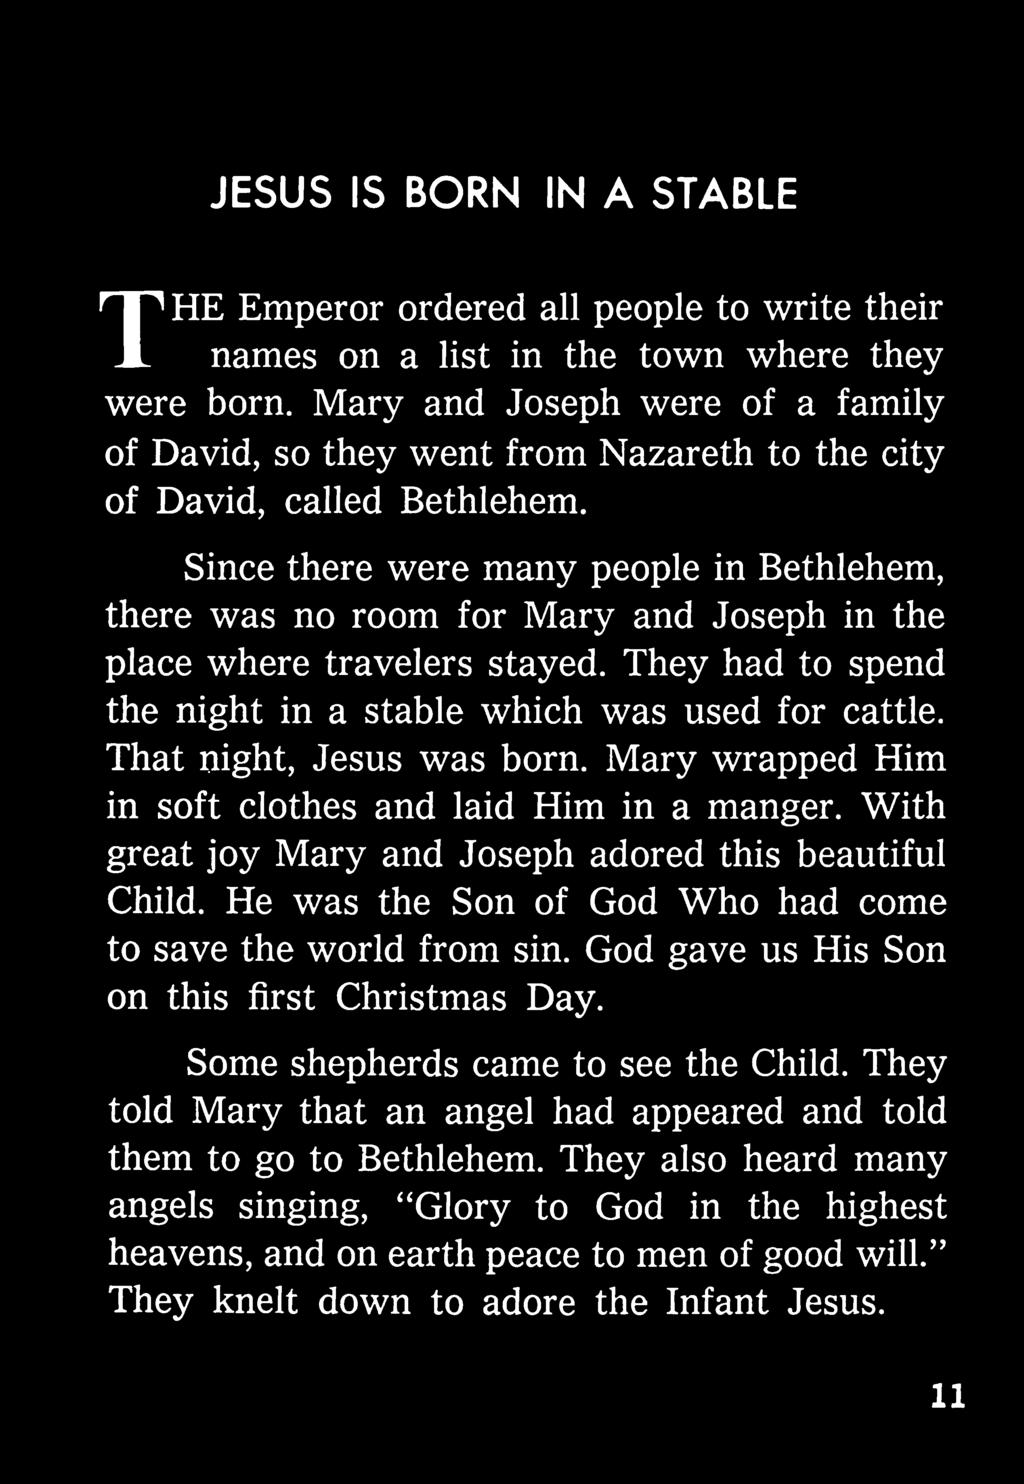 With great joy Mary and Joseph adored this beautiful Child. He was the Son of God Who had come to save the world from sin.